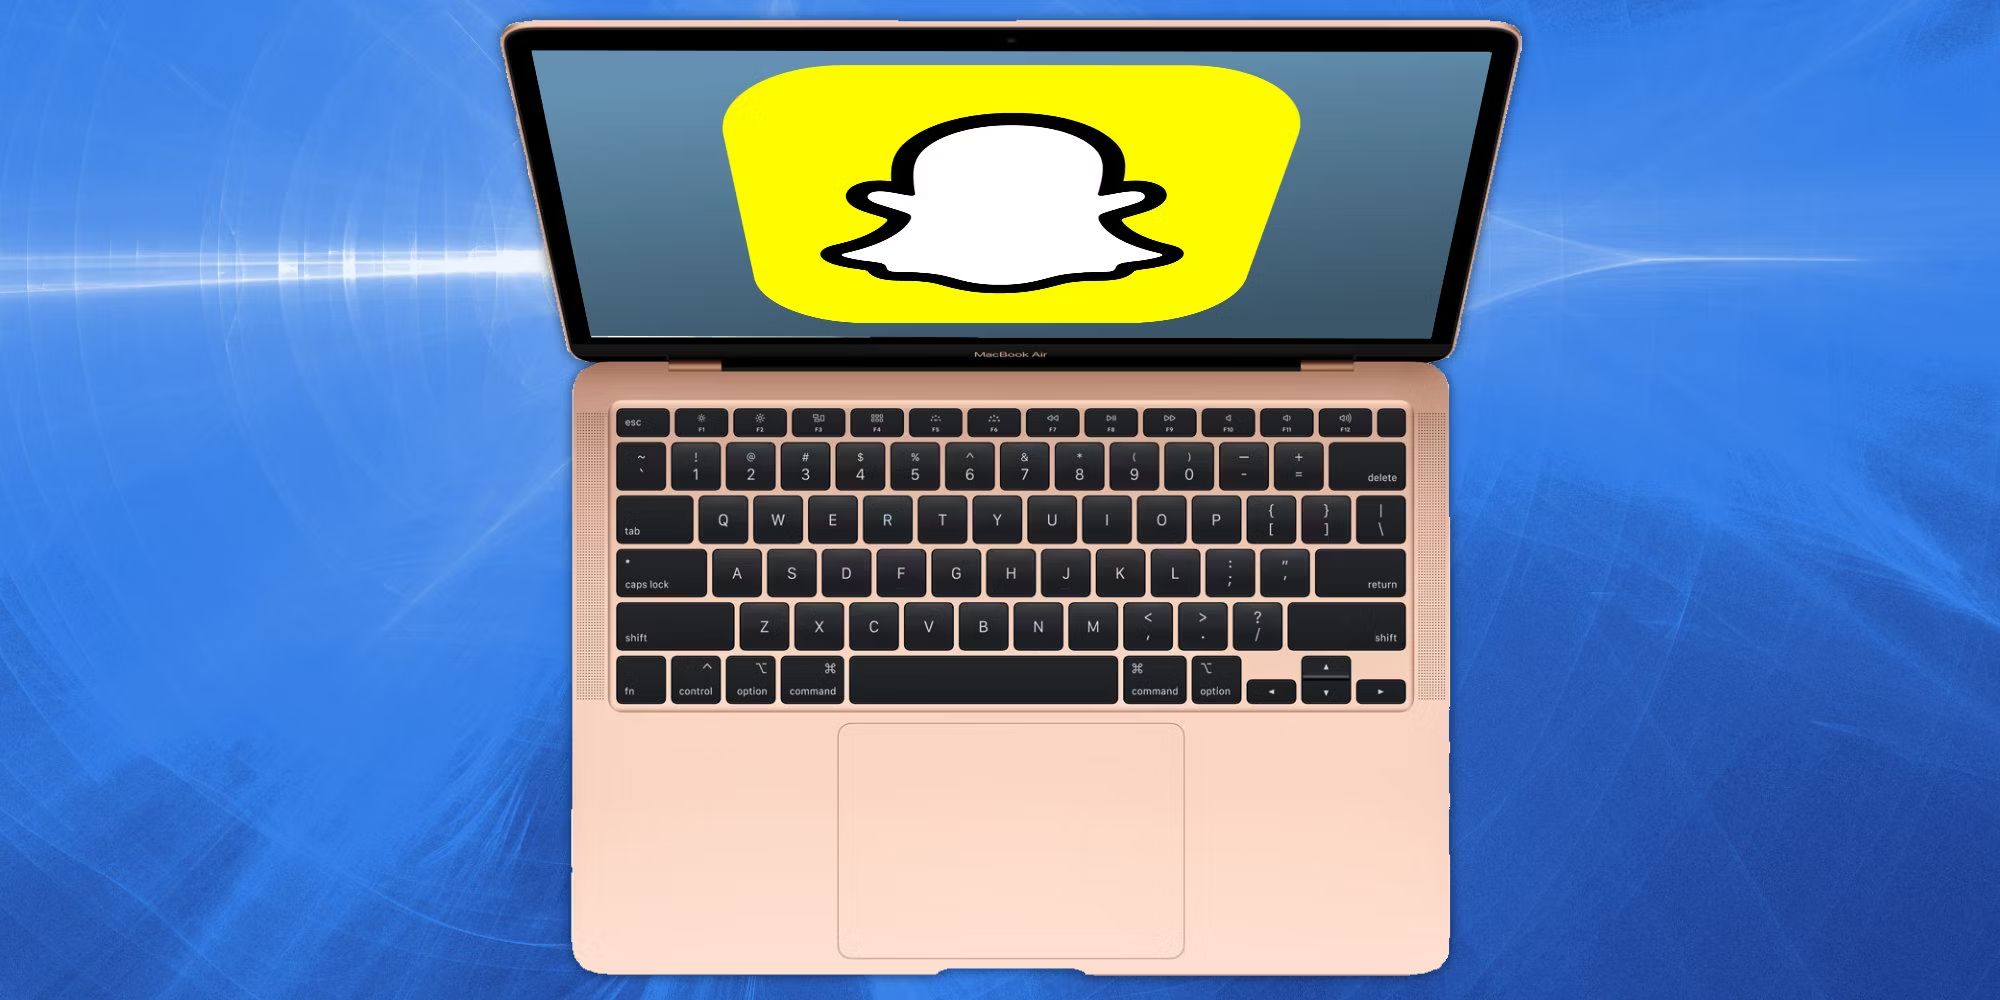 How To Download Snapchat On Macbook